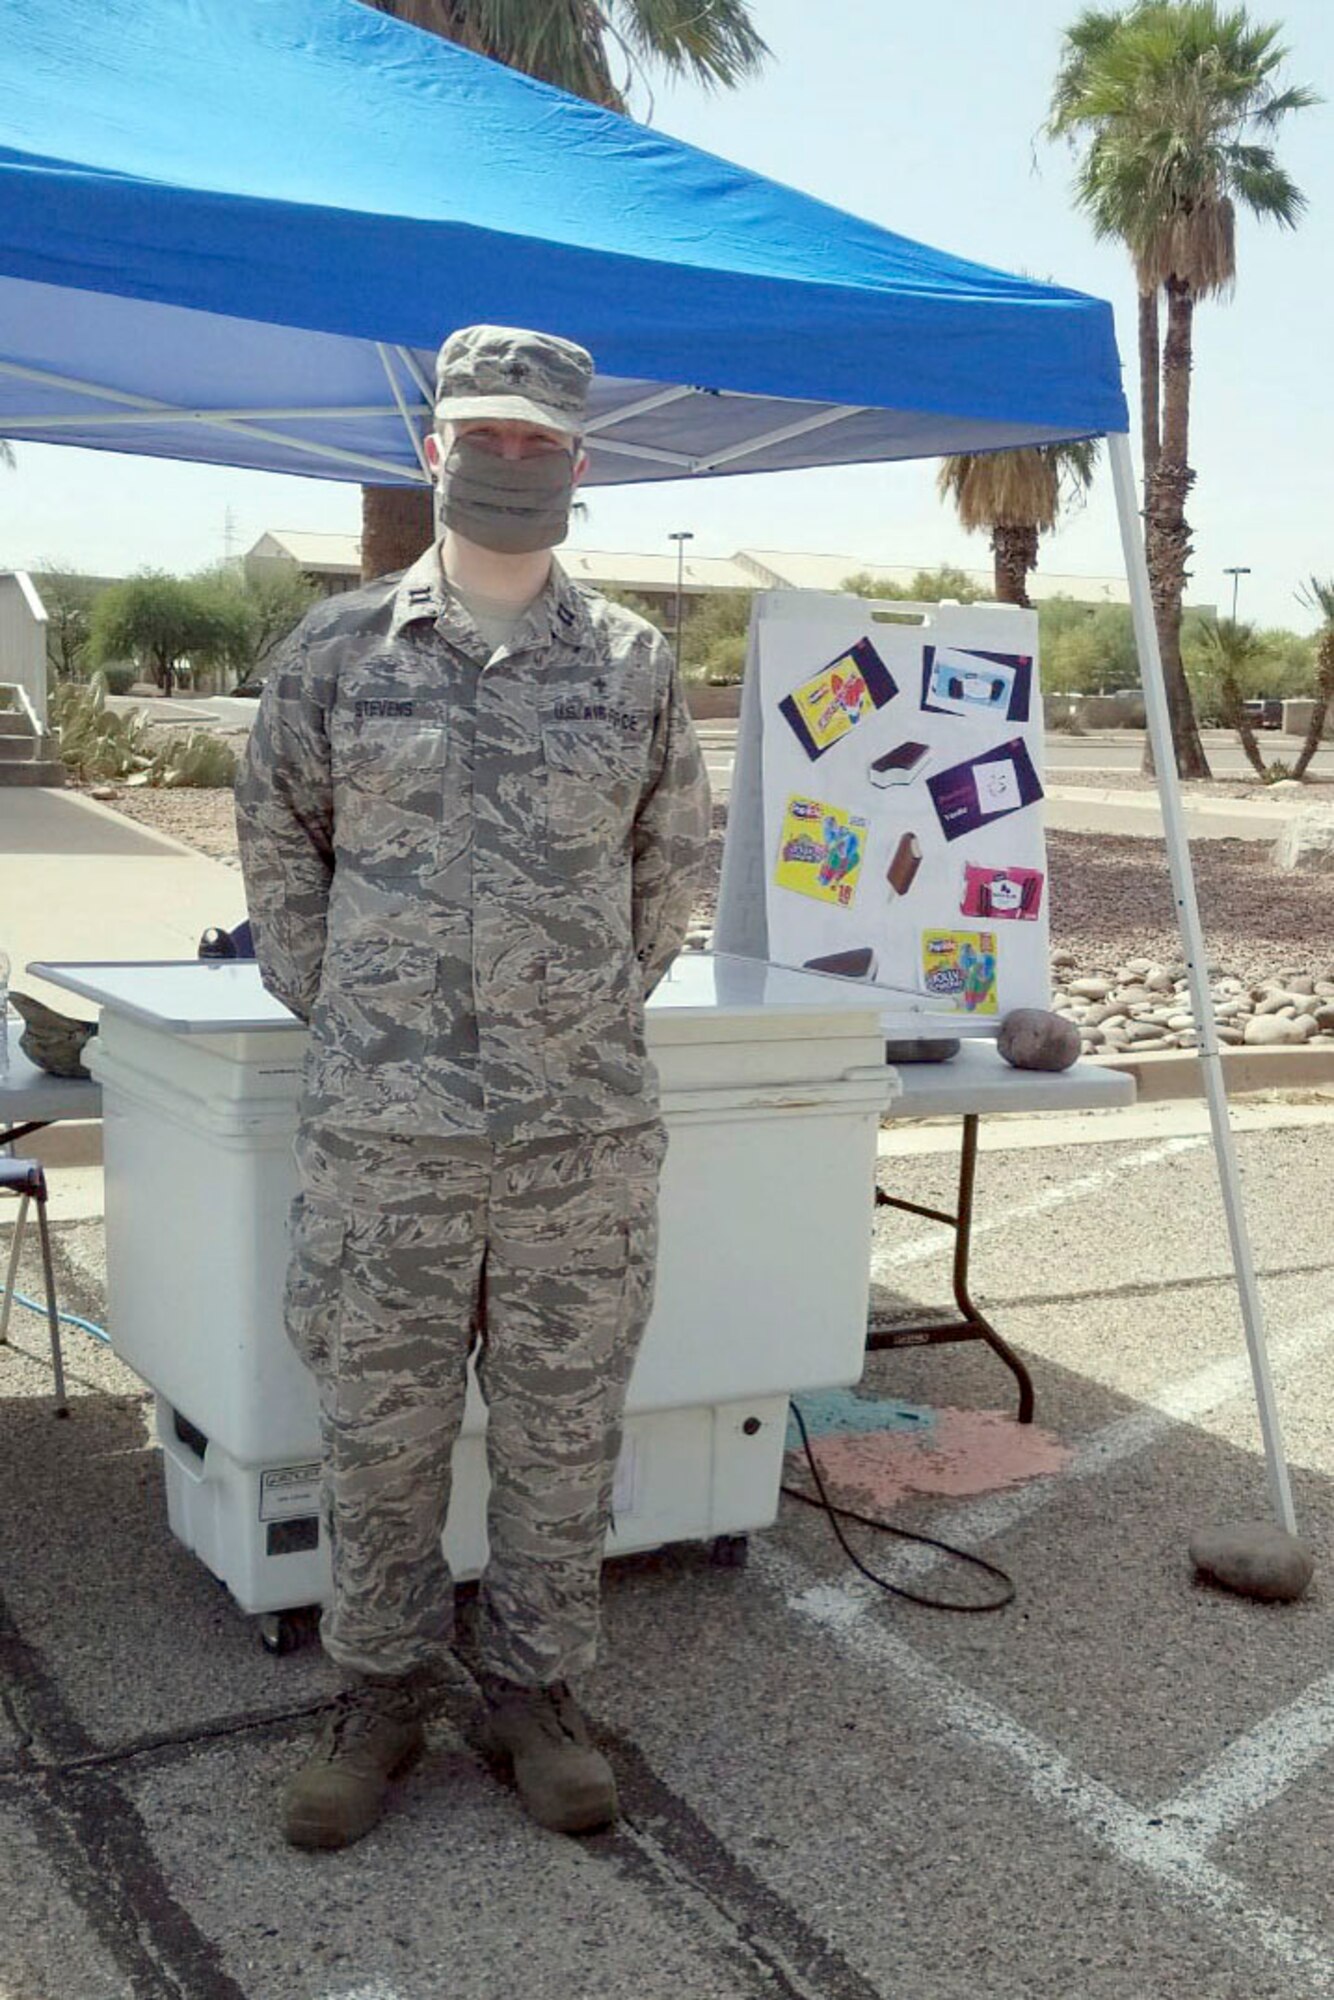 Chaplain (Capt.) Joshua Stevens passed out ice cream to Airmen while serving on temporary duty at Davis-Monthan Air Force Base, Ariz. Stevens participated in a number of morale-building activities, counseling sessions and reintegration briefings during his month-long tour there in September 2020.